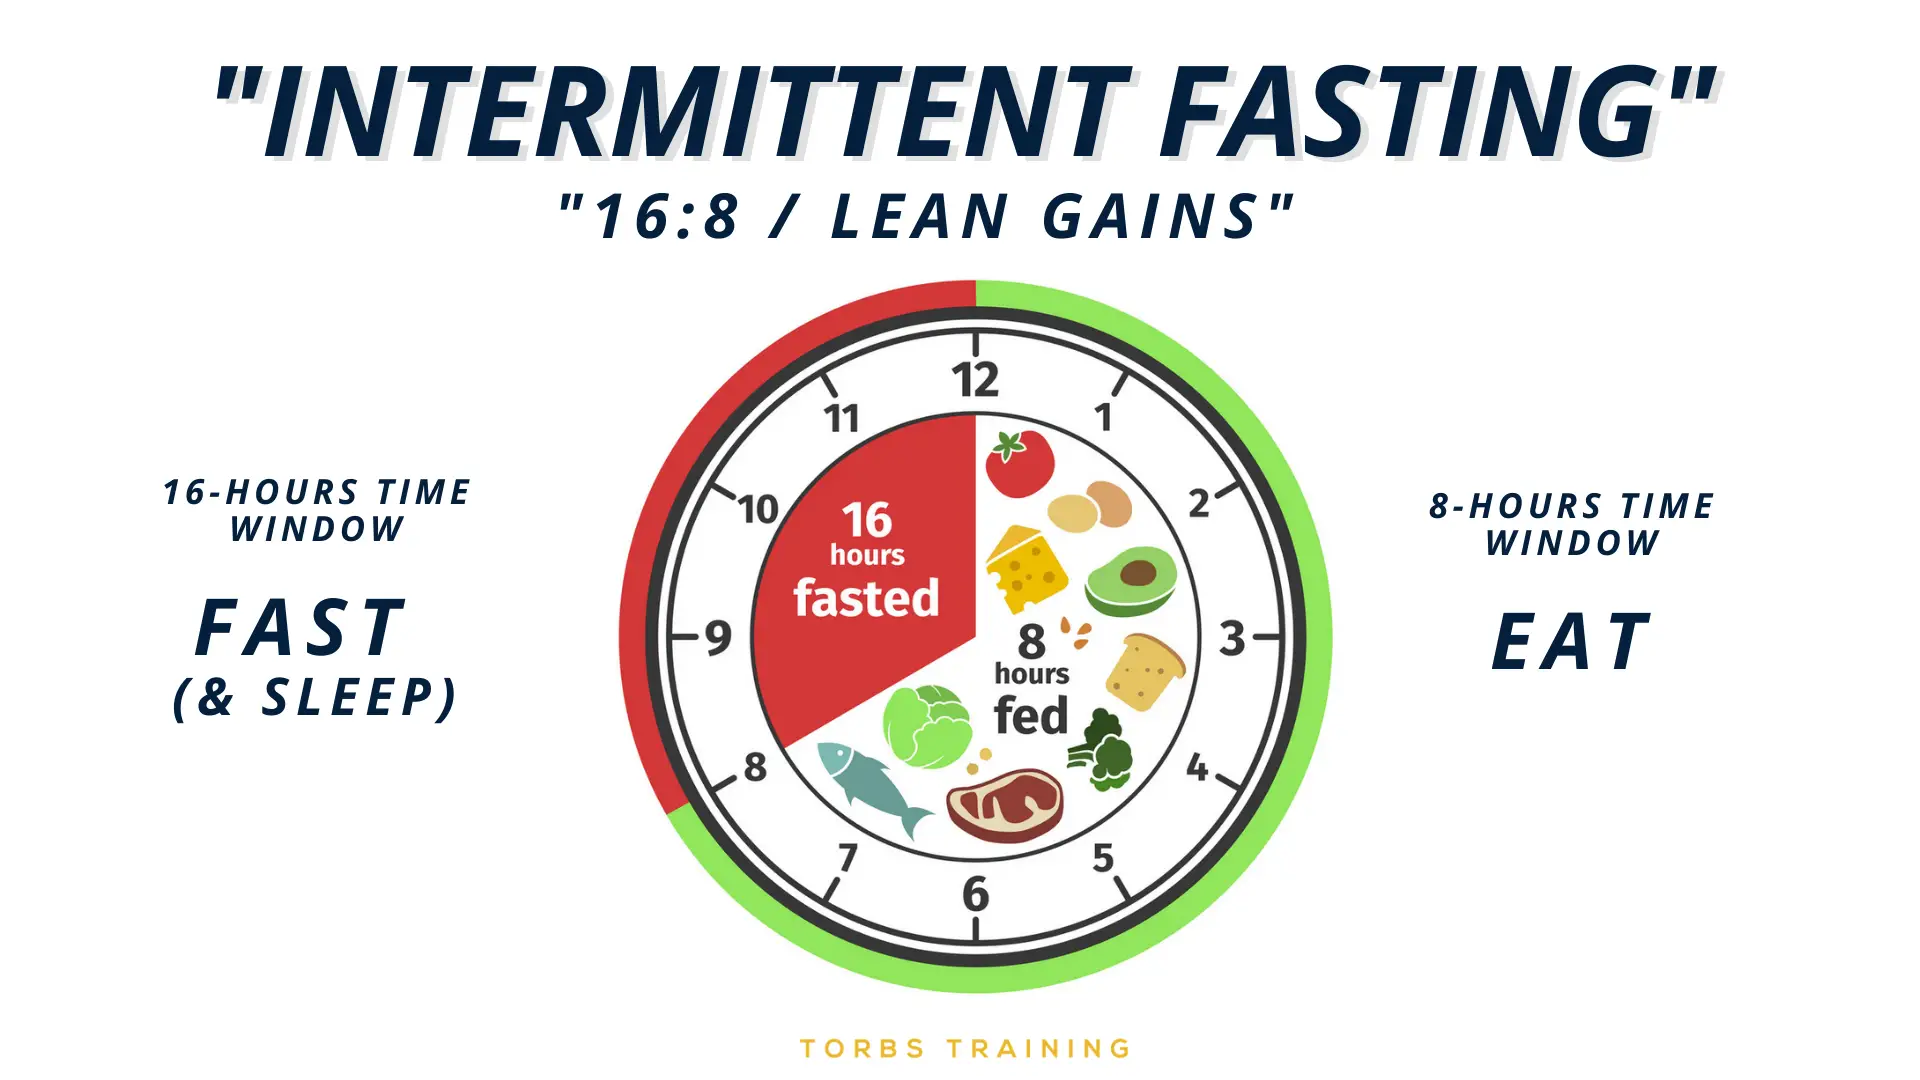 Intermittent Fasting (16:8) For Fat Loss